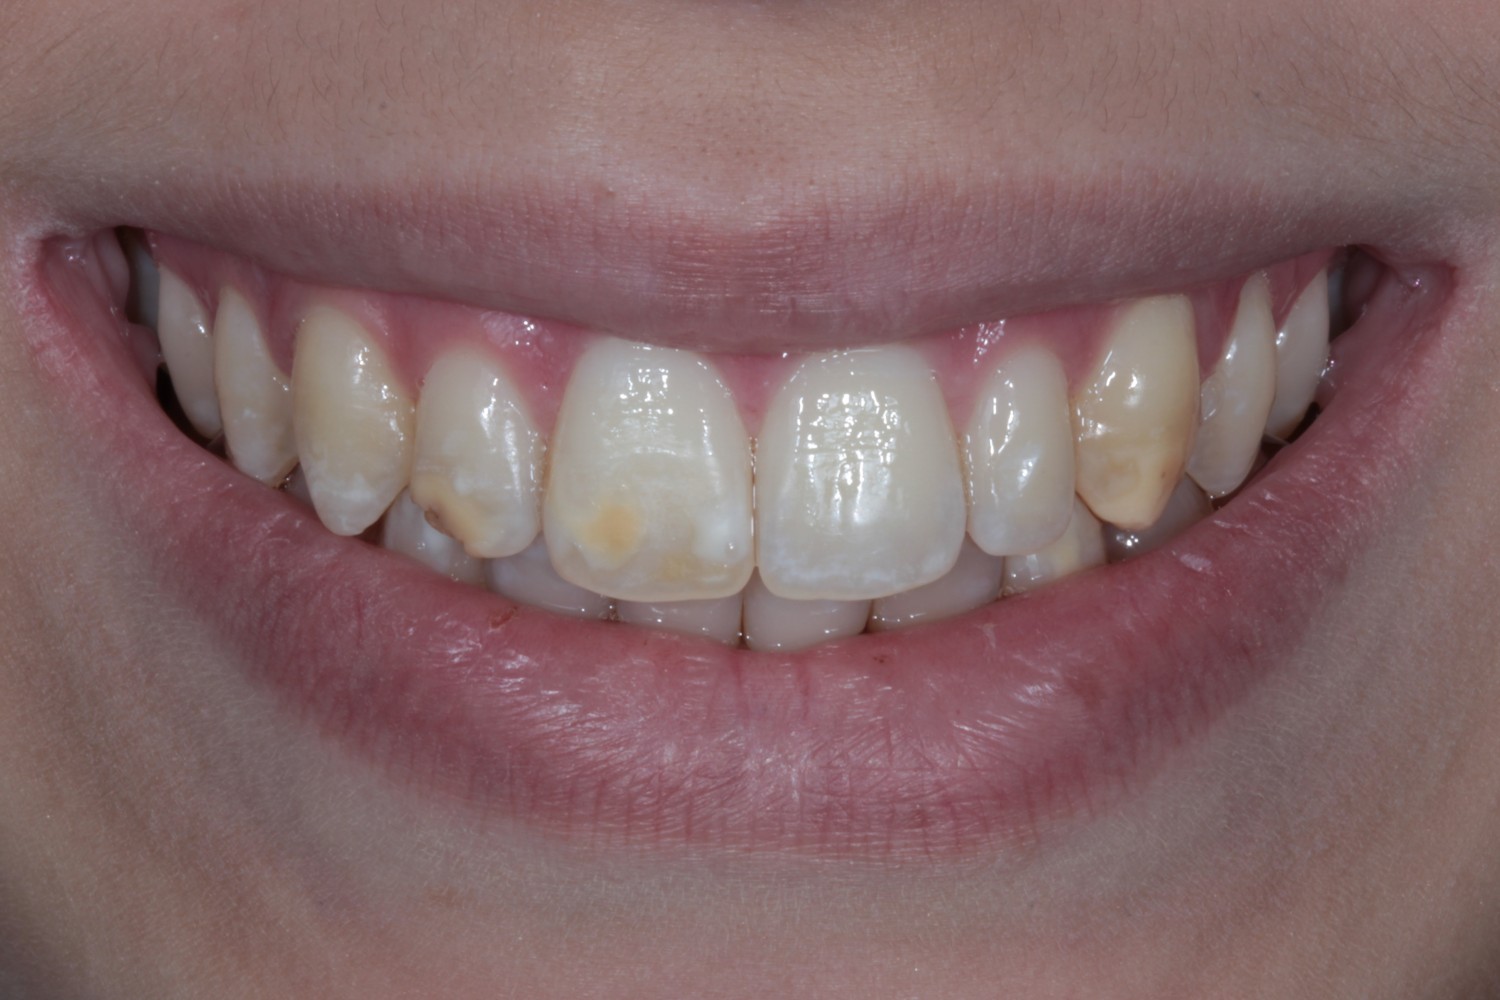 Developmental defects of enamel in permanent dentition: Evaluation and clinical management